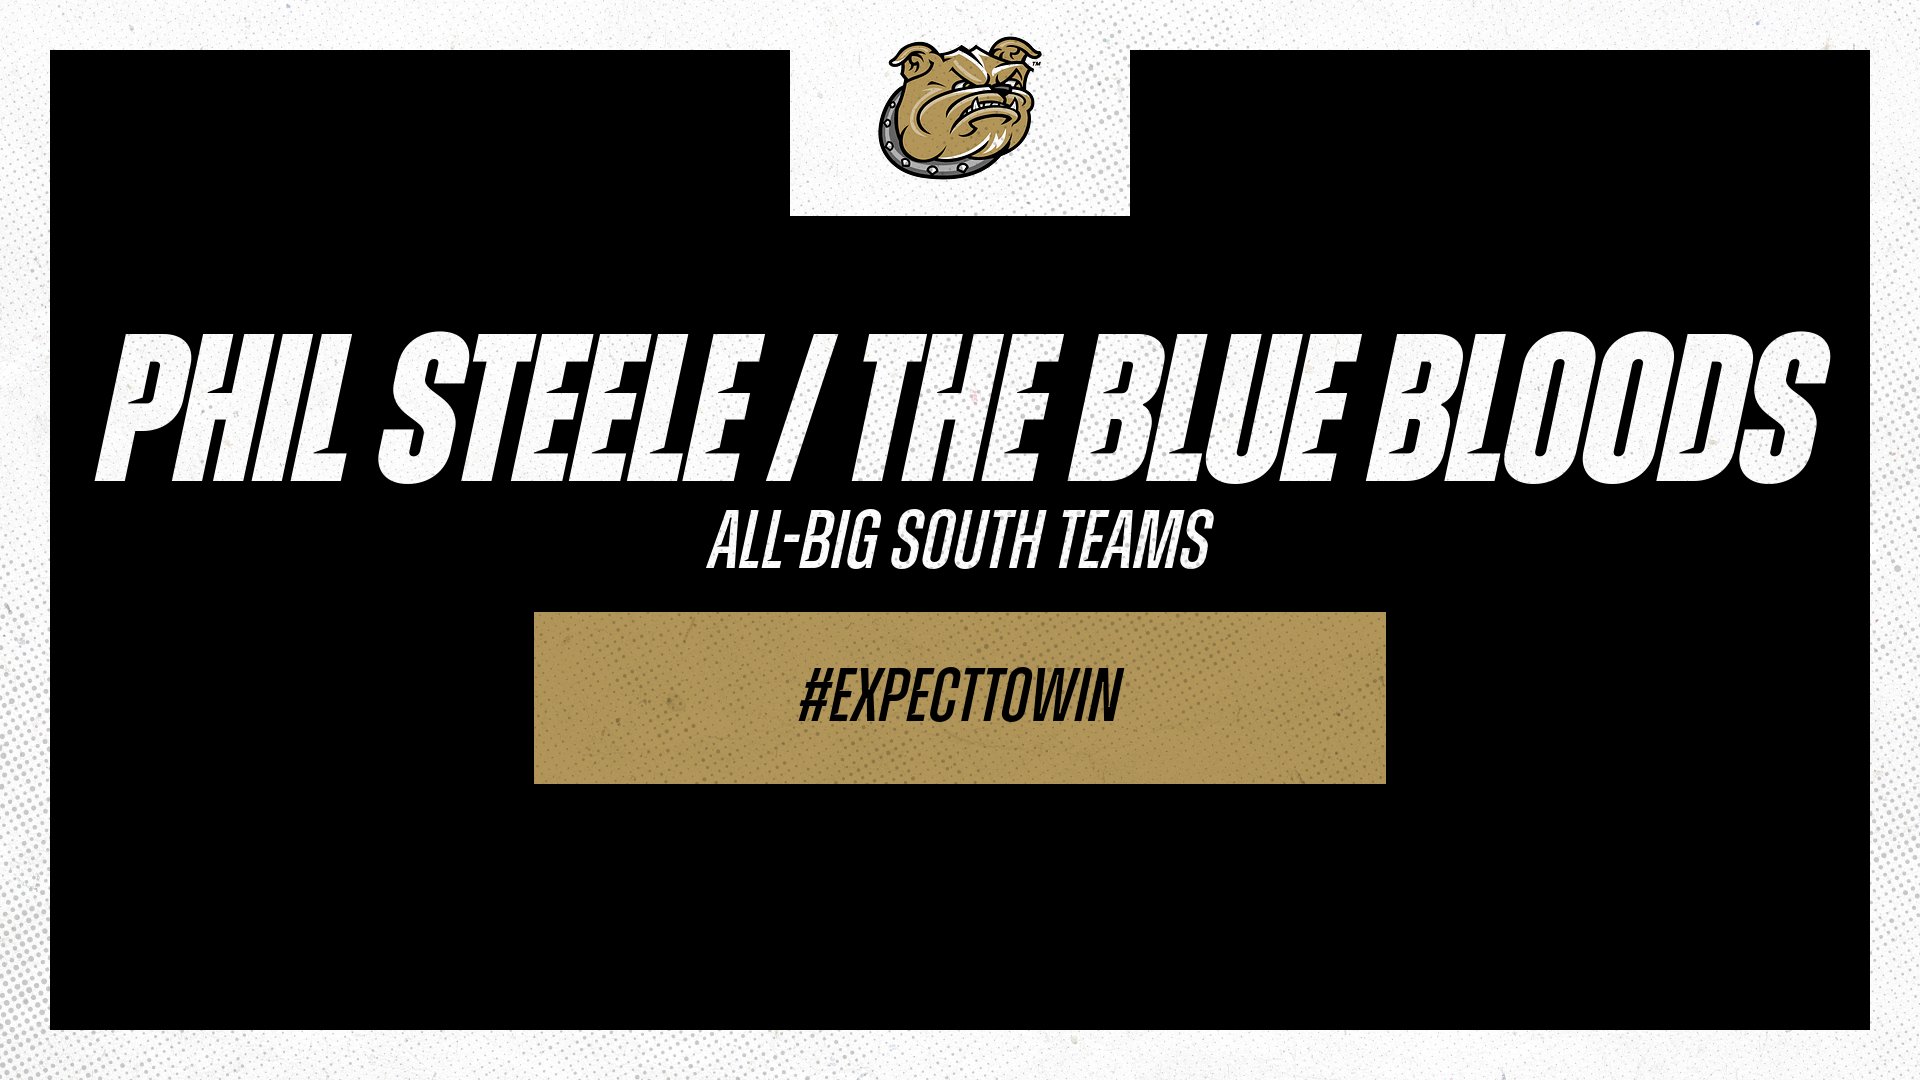 Bulldogs earn honors from Phil Steele and The Blue Bloods